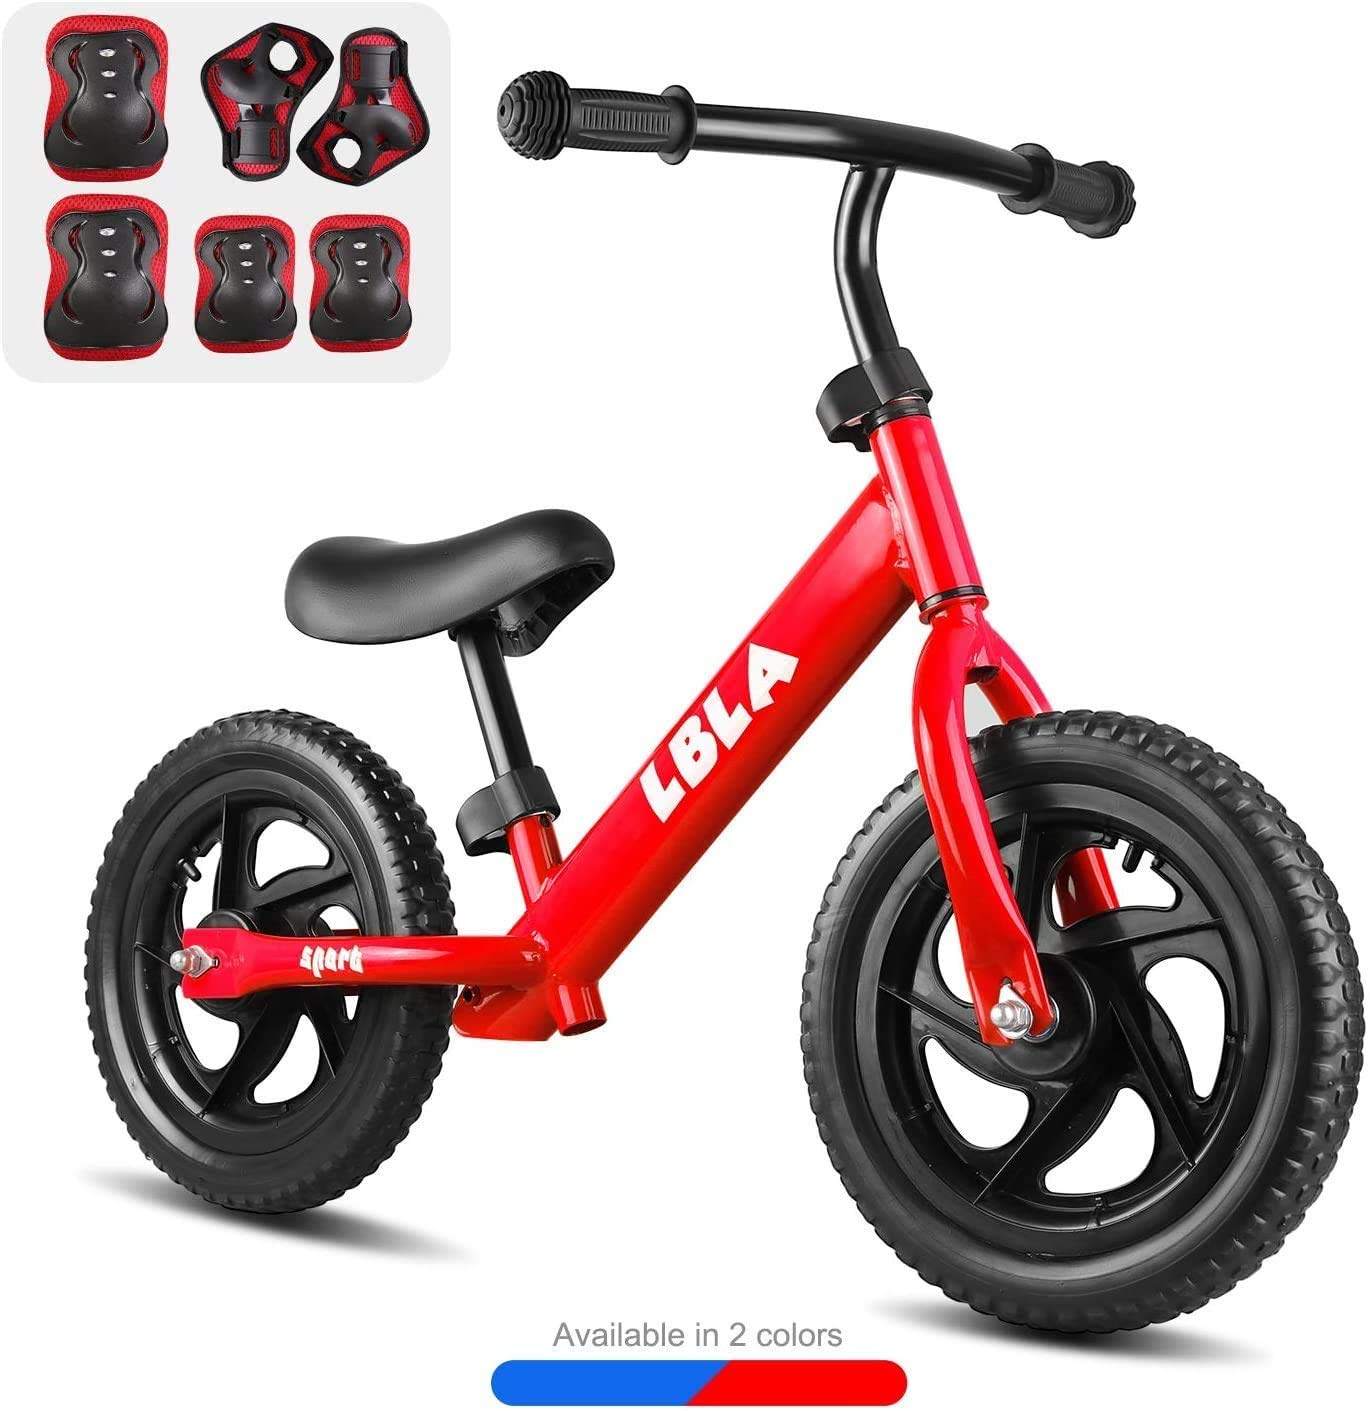 OEM/ODM China Balance Bike - BeebeeRun Kids 12” Classic Sport Balance Bike with Protective Gear, Age 2 to 6 Year Old Boys Girls, No Pedal Sport Training Bicycle – Ealing